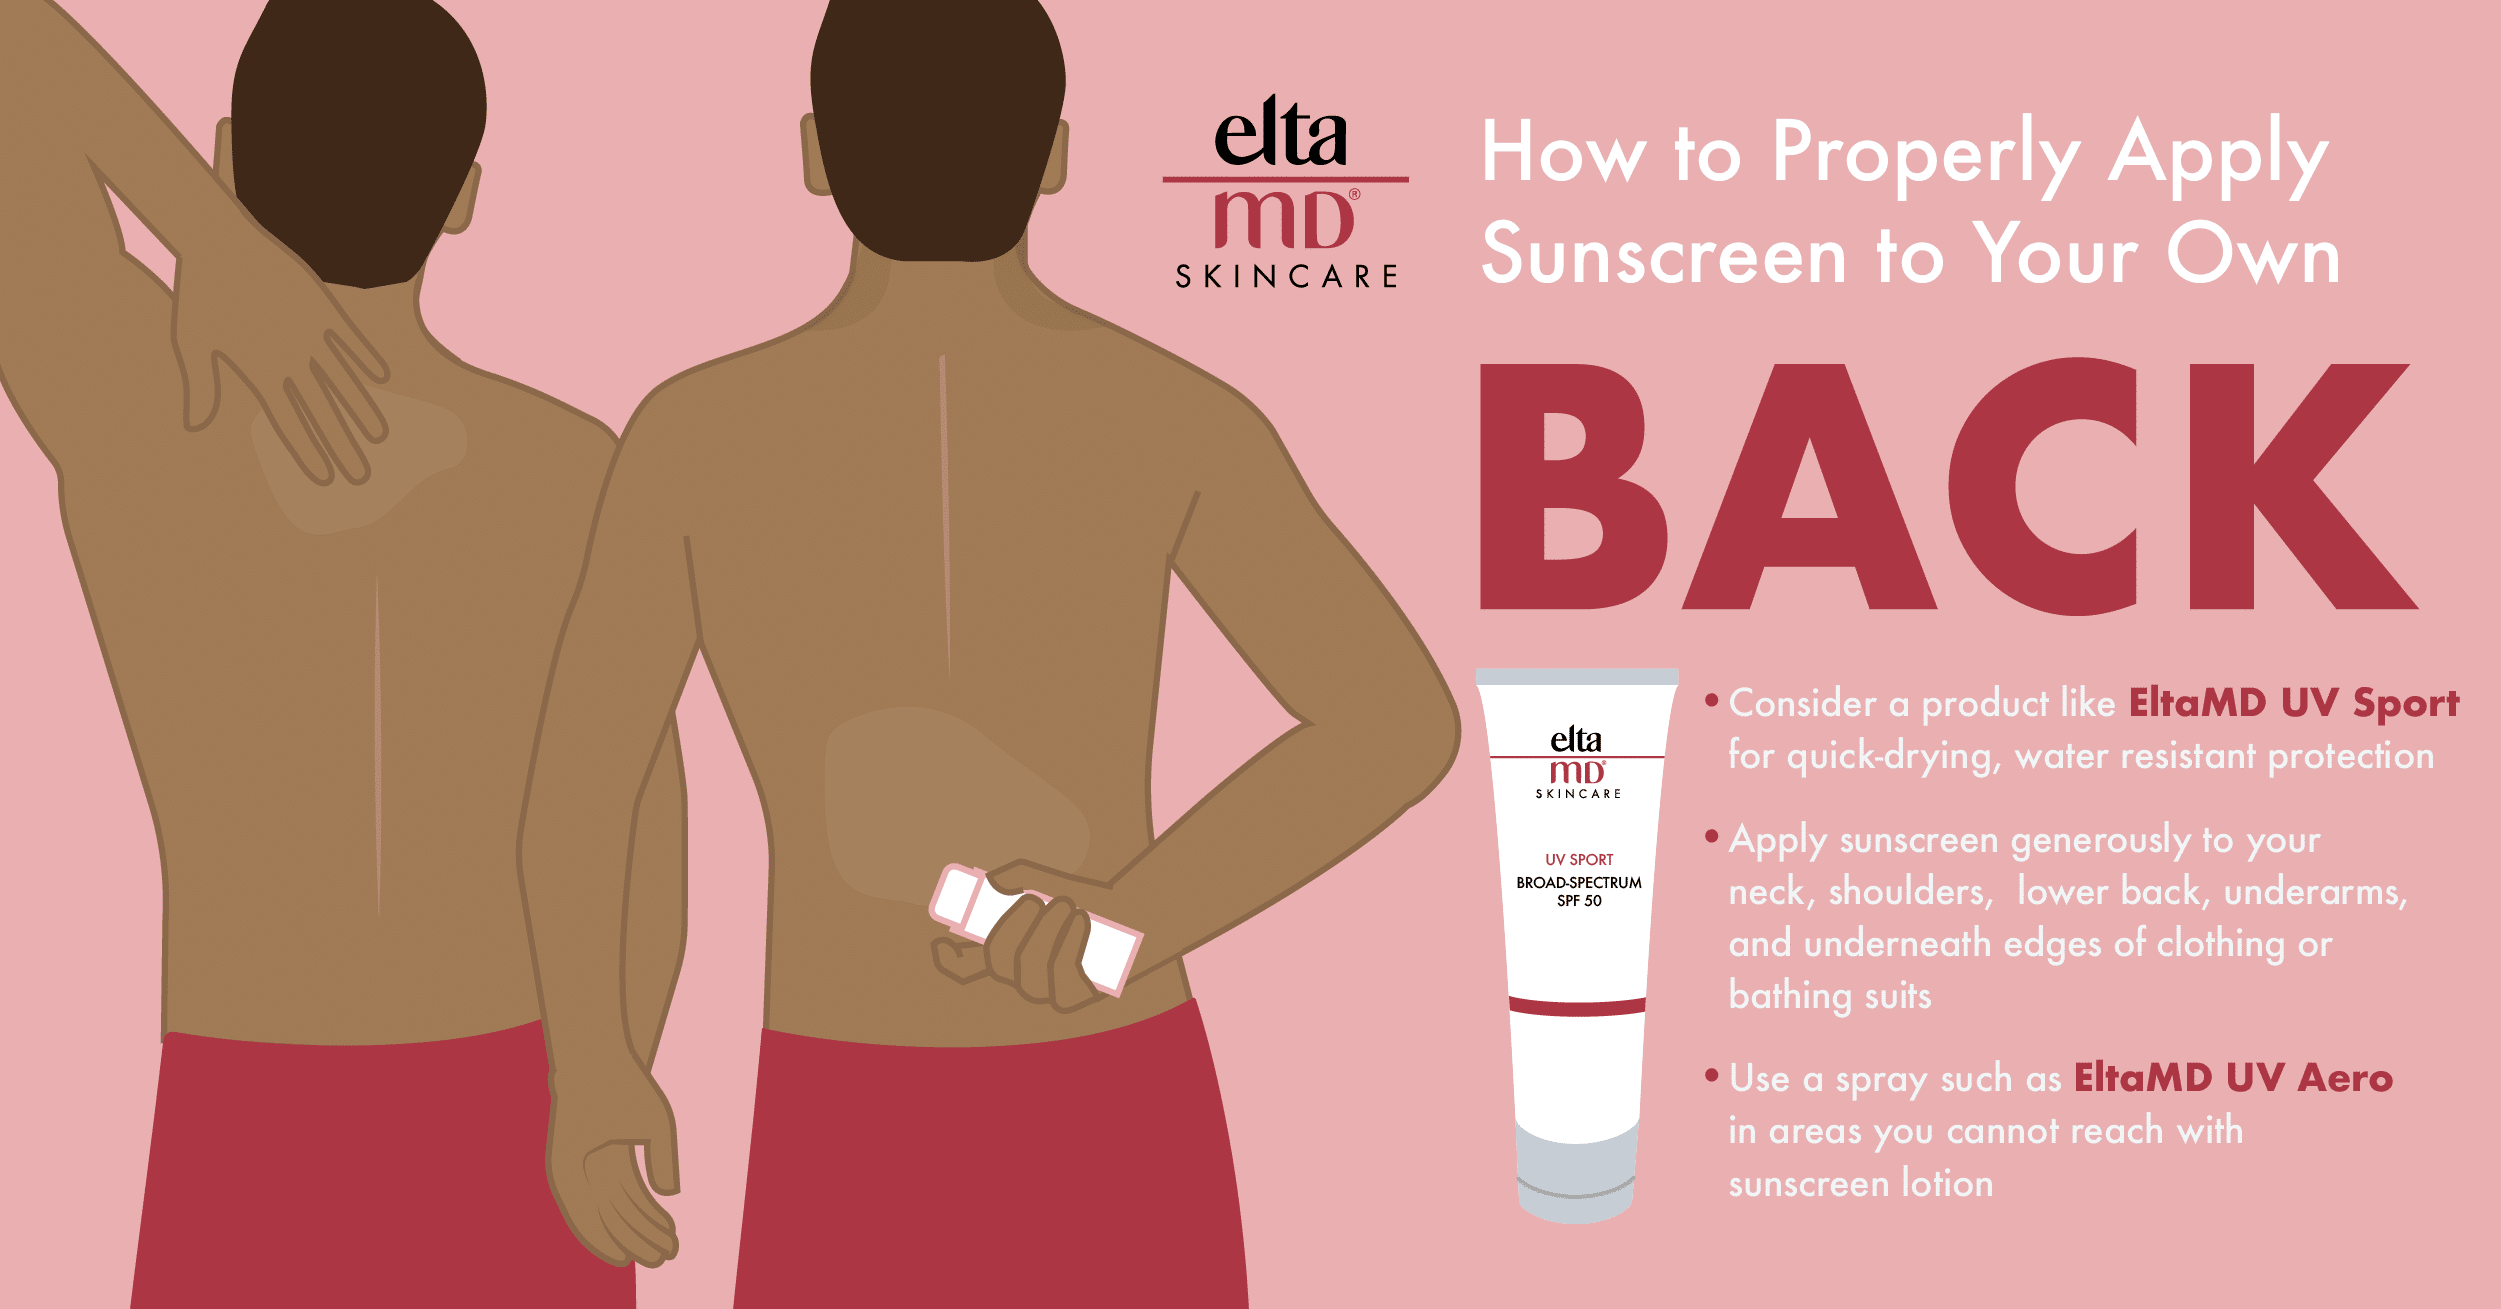 How to properly apply sunscreen to your back